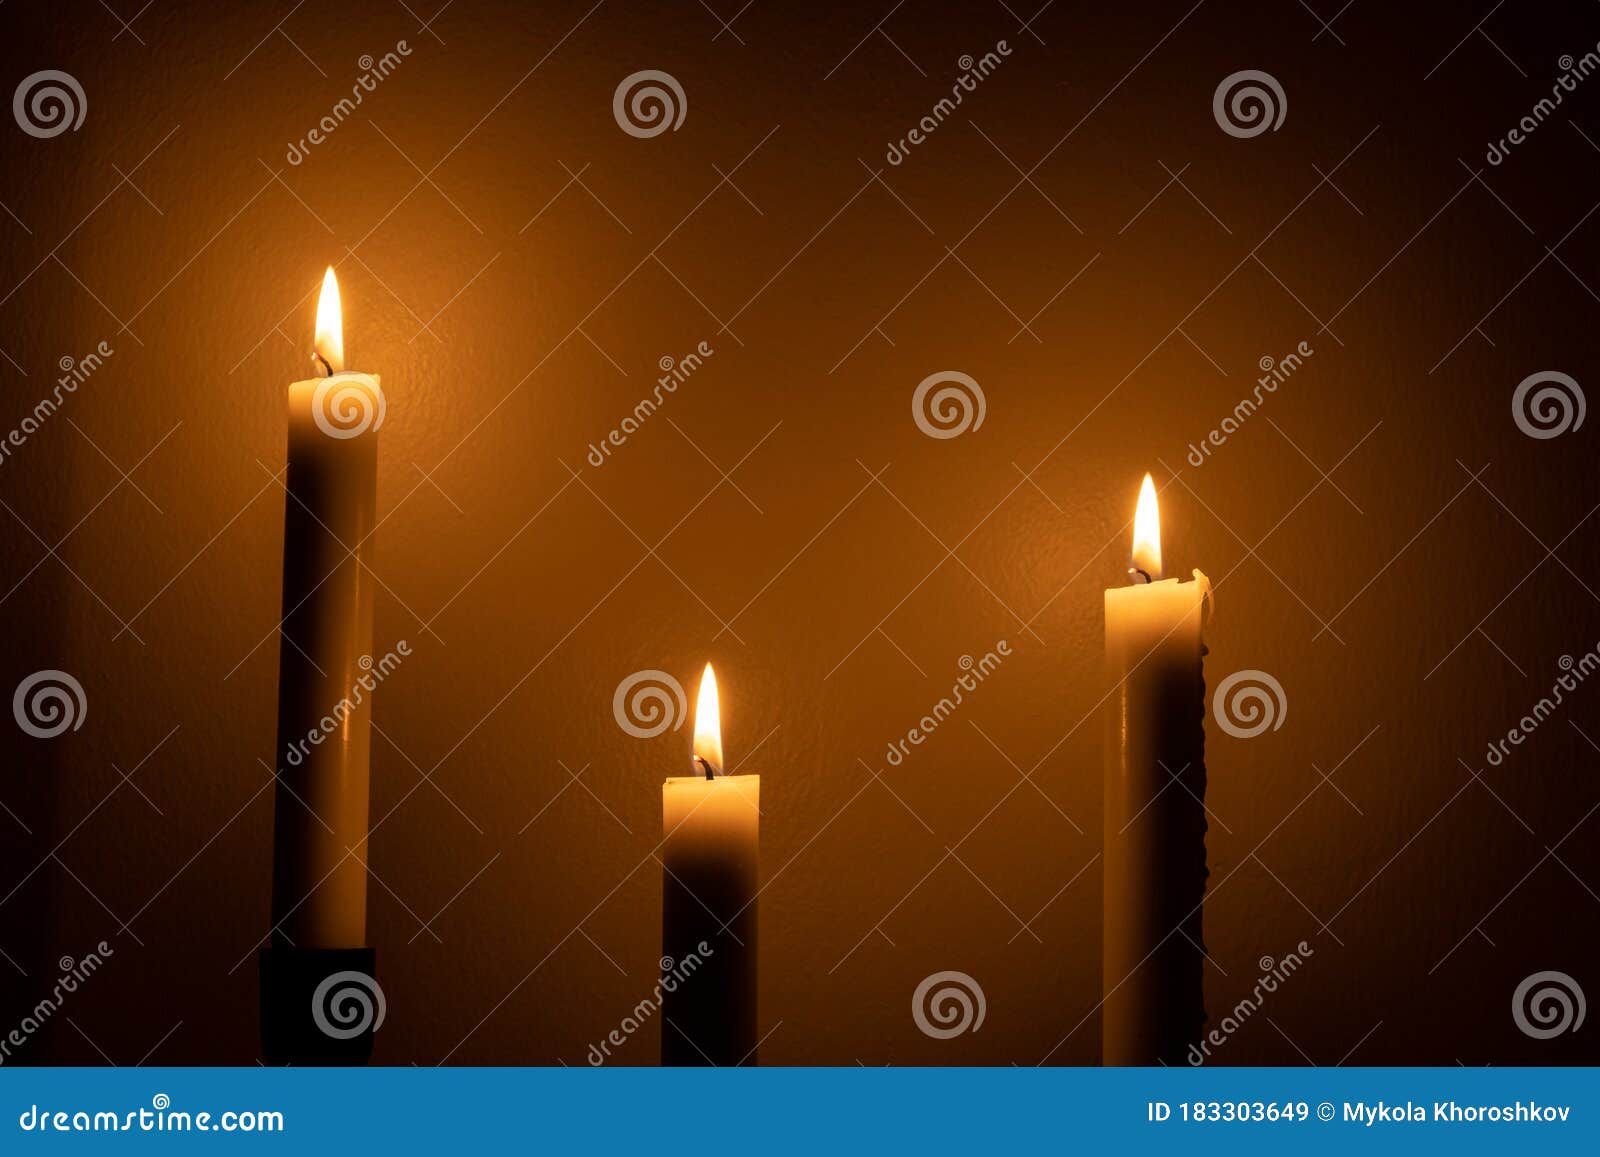 Large White Burning Candles in Dark Room Over Wall Background Stock ...